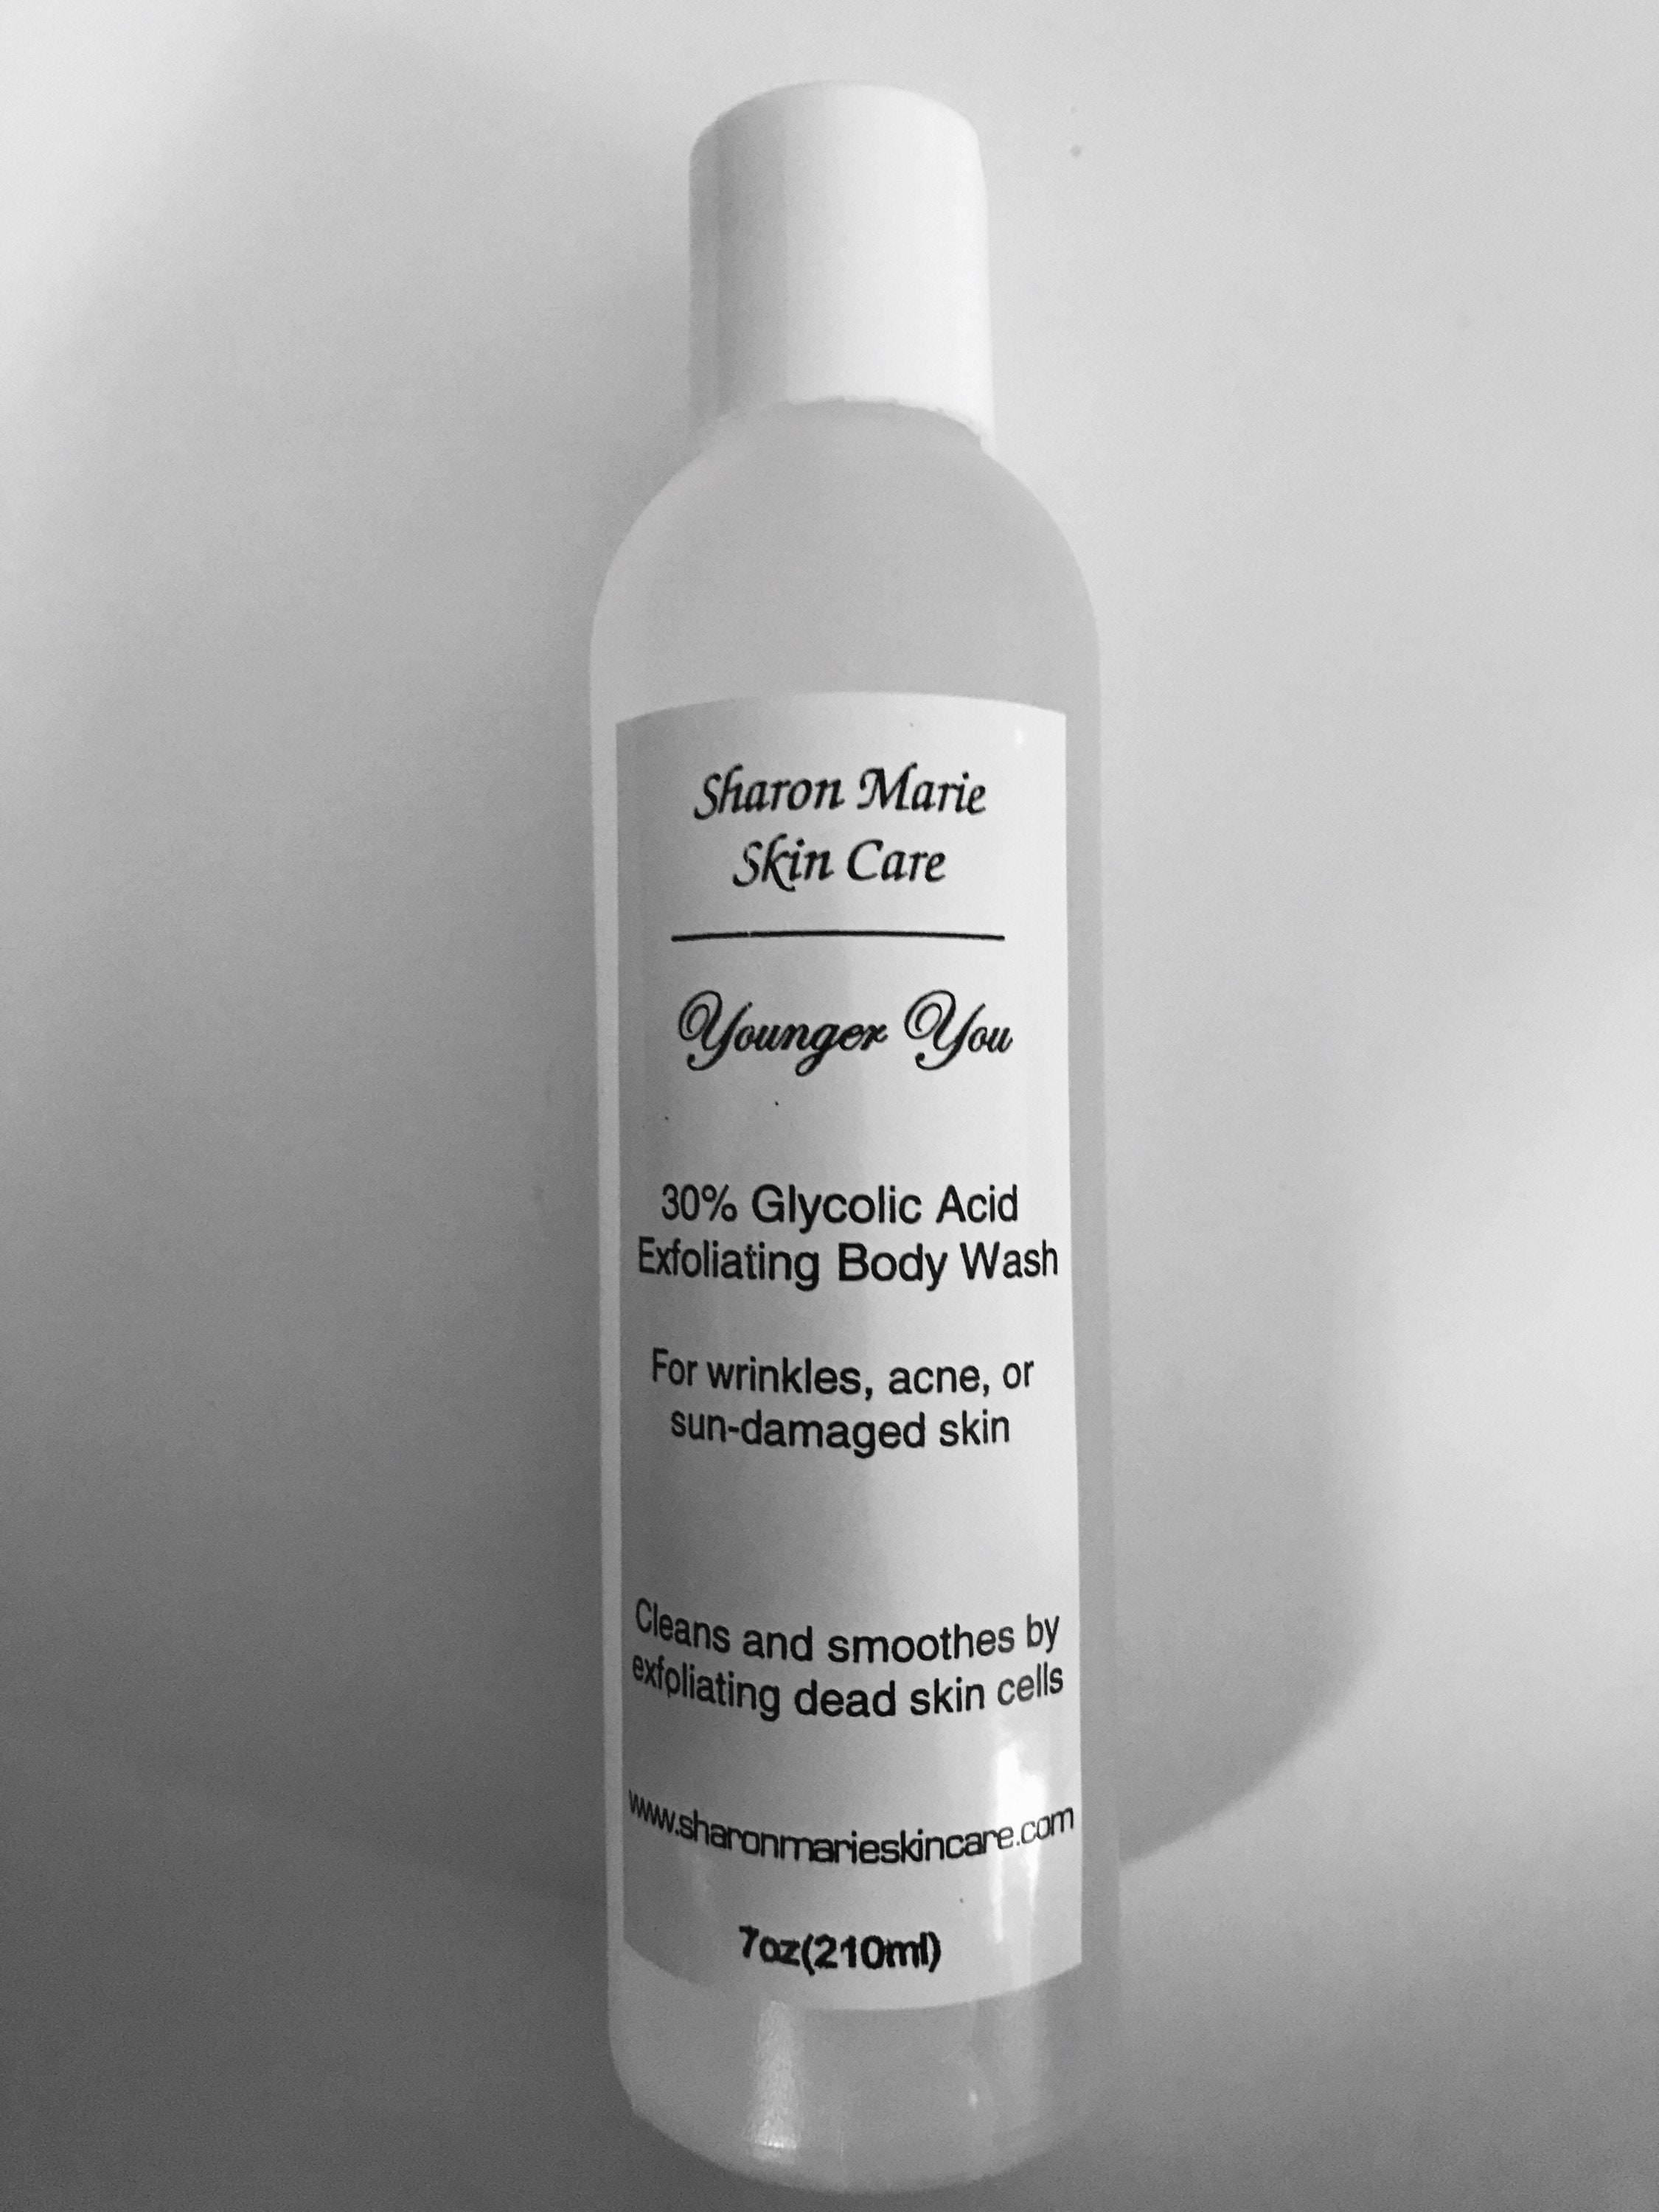 Body Wash and Peel With 30% Glycolic Acid